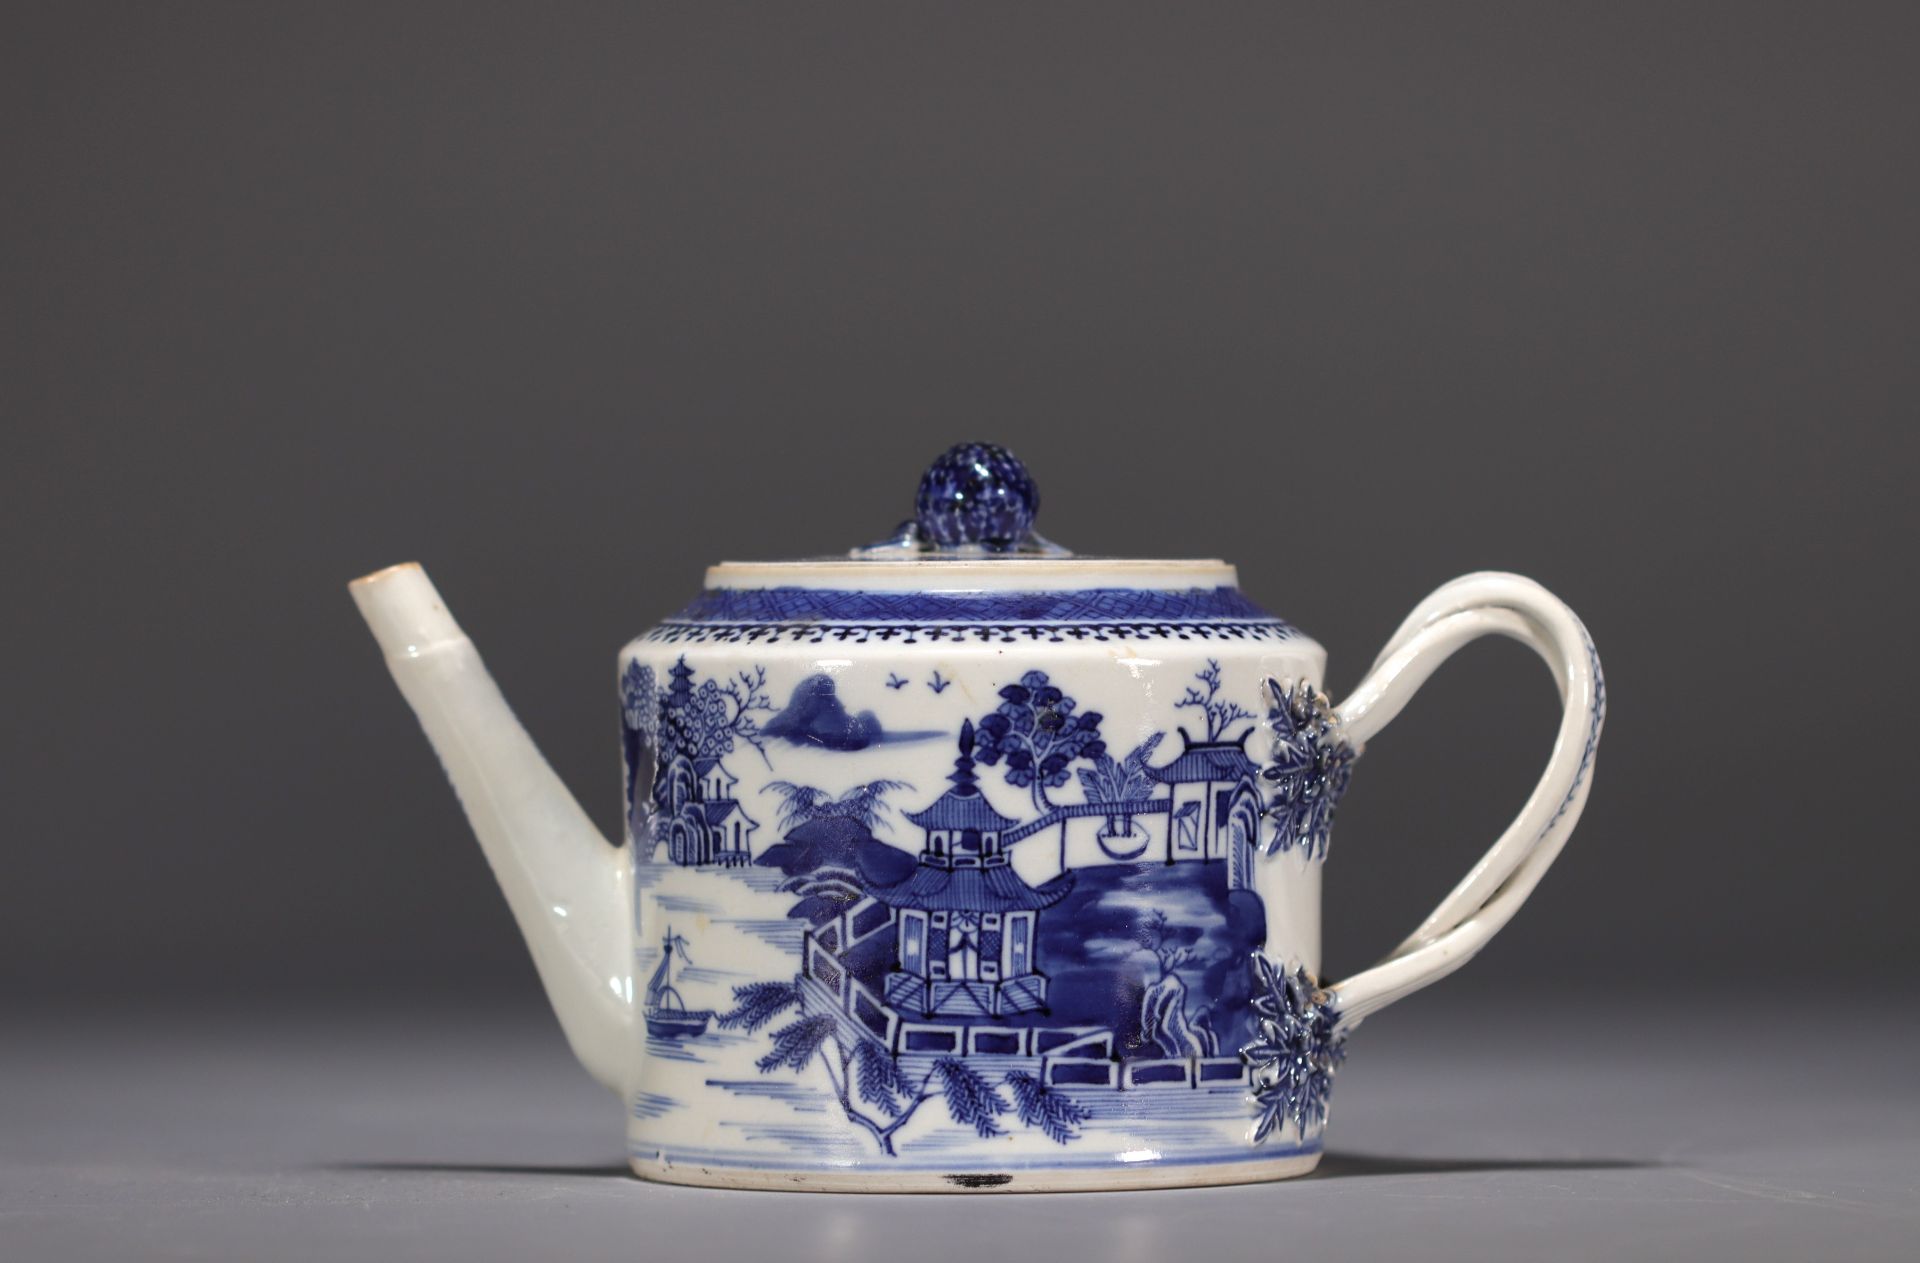 China - A white and blue porcelain teapot decorated with landscapes and a junk, 18th century. - Bild 2 aus 8